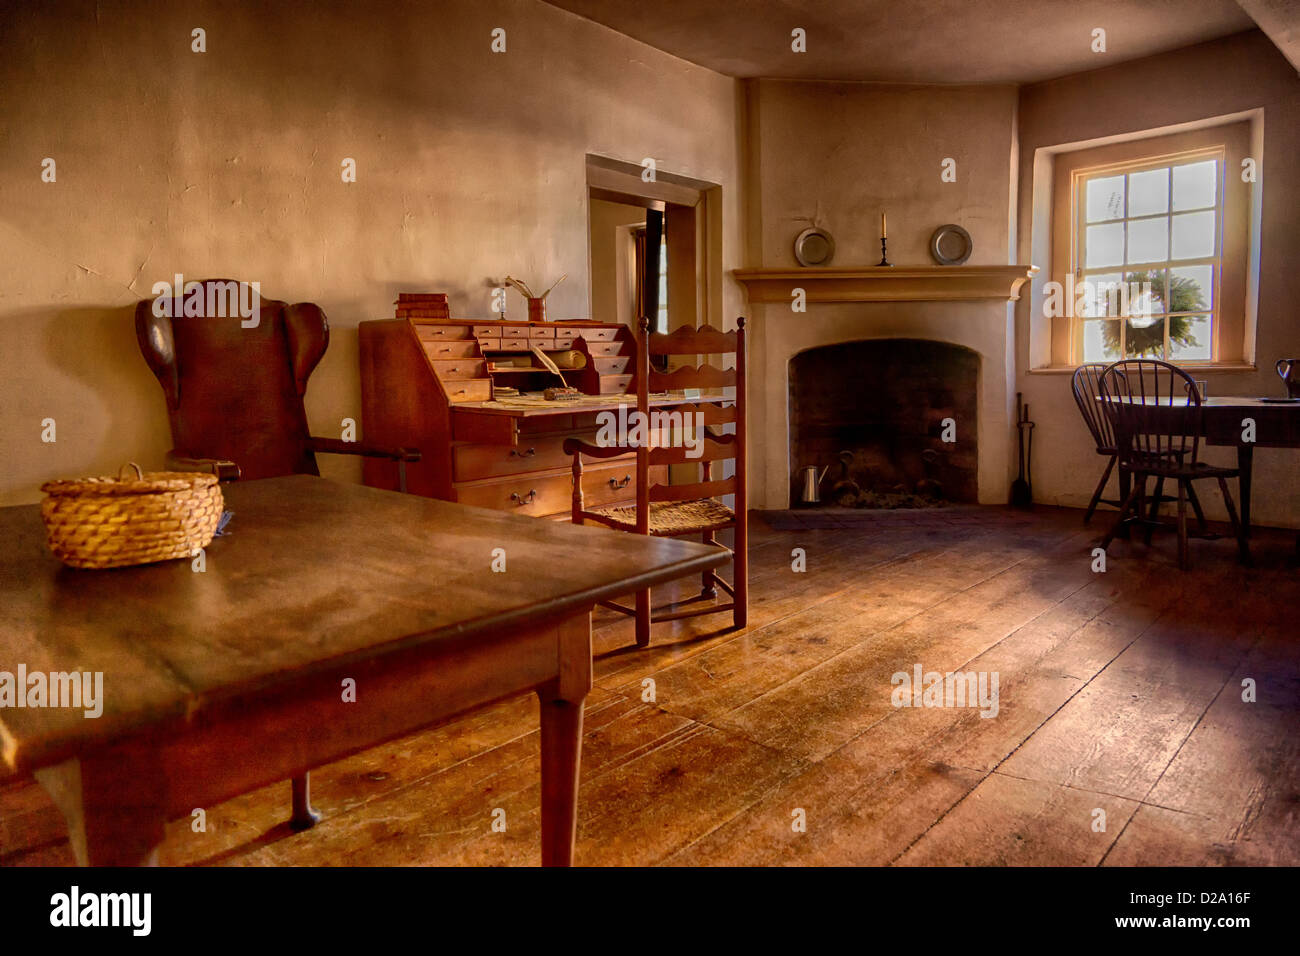 Inside View Of An Old House Stock Photo Alamy